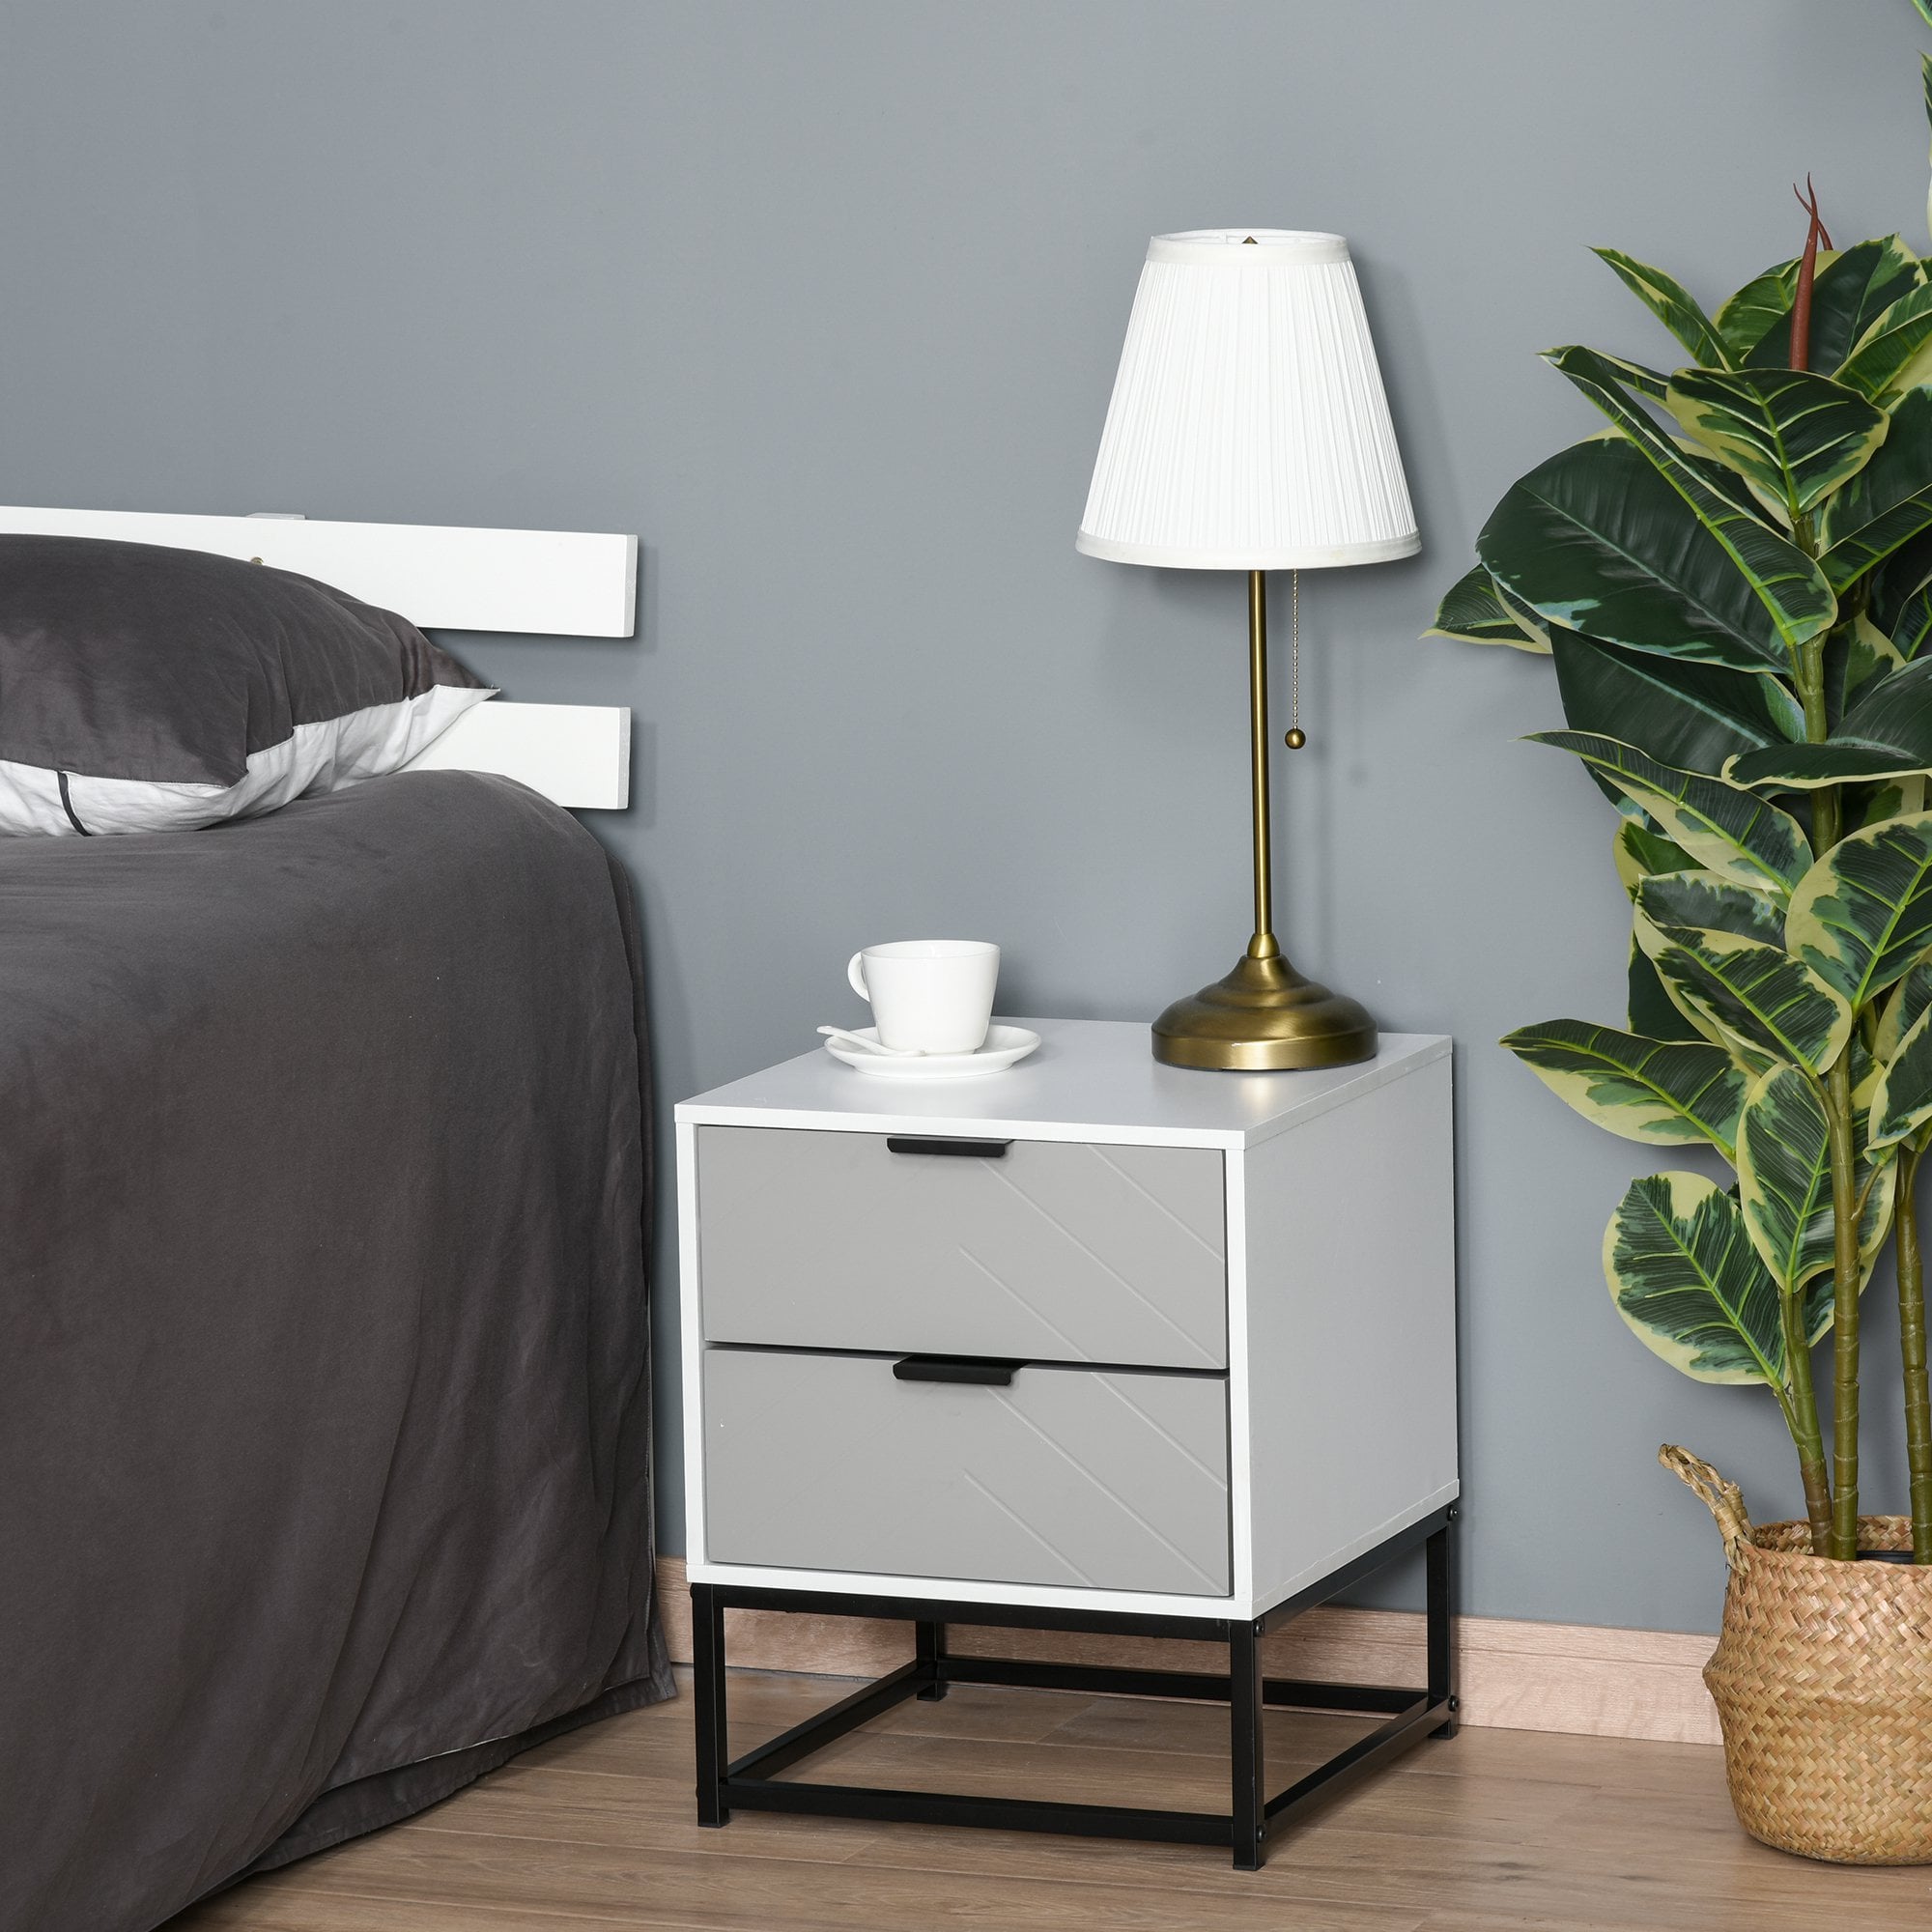 Bedside Cabinet with 2 Drawer Storage Unit - Unique Shape Bedroom Table Nightstand with Metal Base - for Living Room - Study Room - Dorm Unit and Base